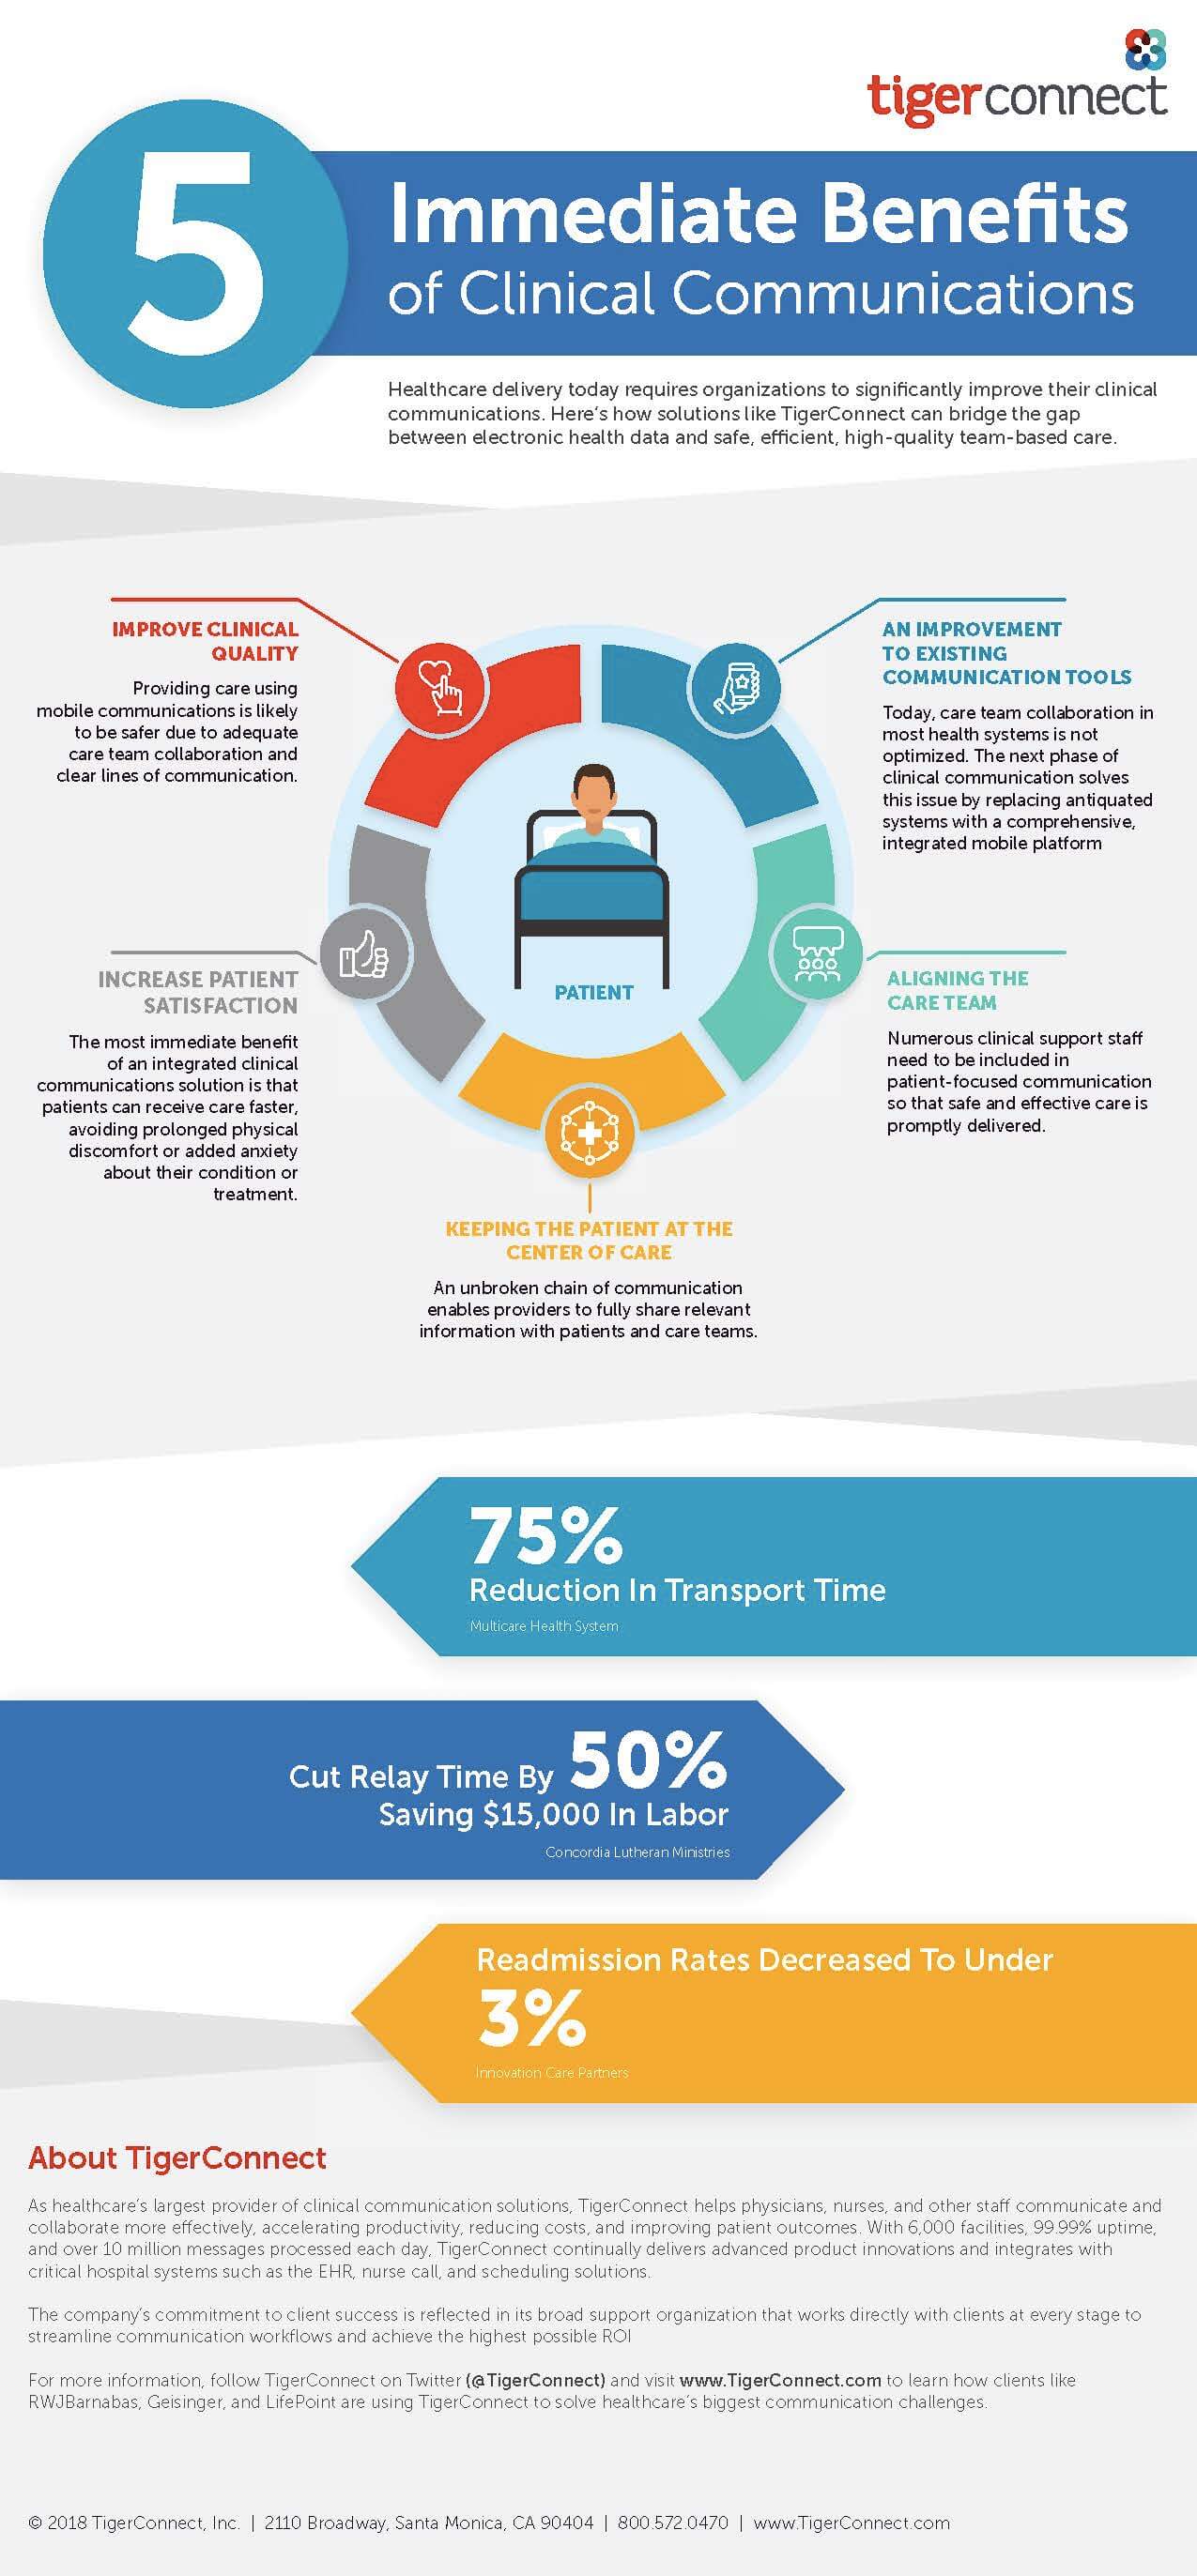 Tigerconnect Logo - 5 Benefits of Clinical Communication | Infographic | TigerConnect